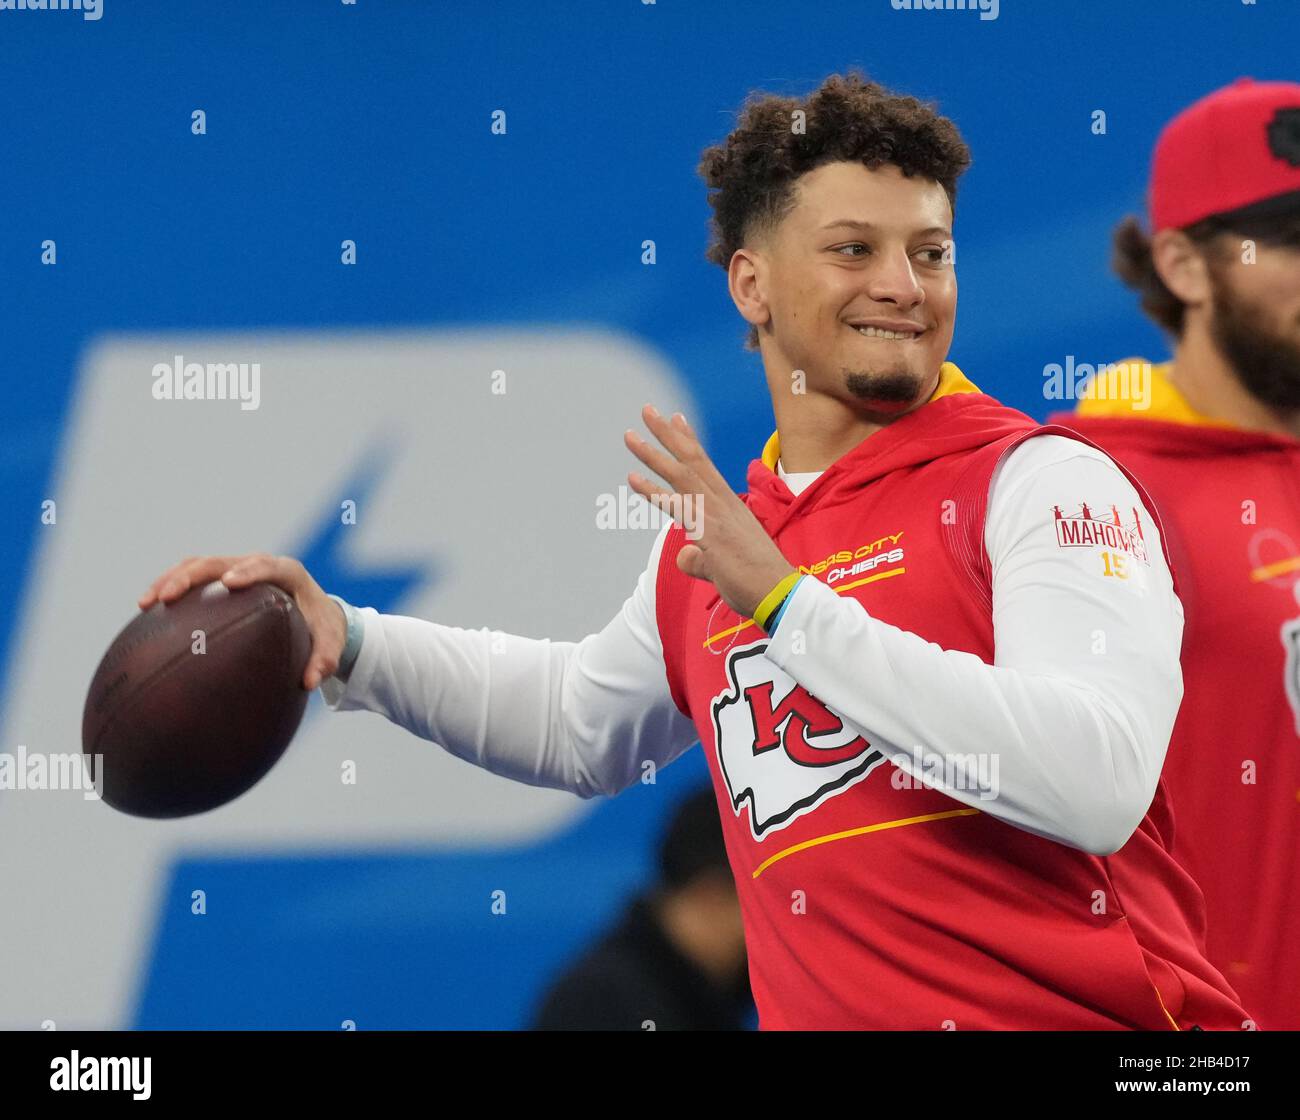 Inglewood, USA. 16th Dec, 2021. Kansas City Chiefs quarterback Patrick Mahomes warms up prior to the start of game against the Los Angeles Chargers at SoFi Stadium on Thursday, December 16, 2021 in Inglewood, California. Photo by Jon SooHoo/UPI Credit: UPI/Alamy Live News Stock Photo